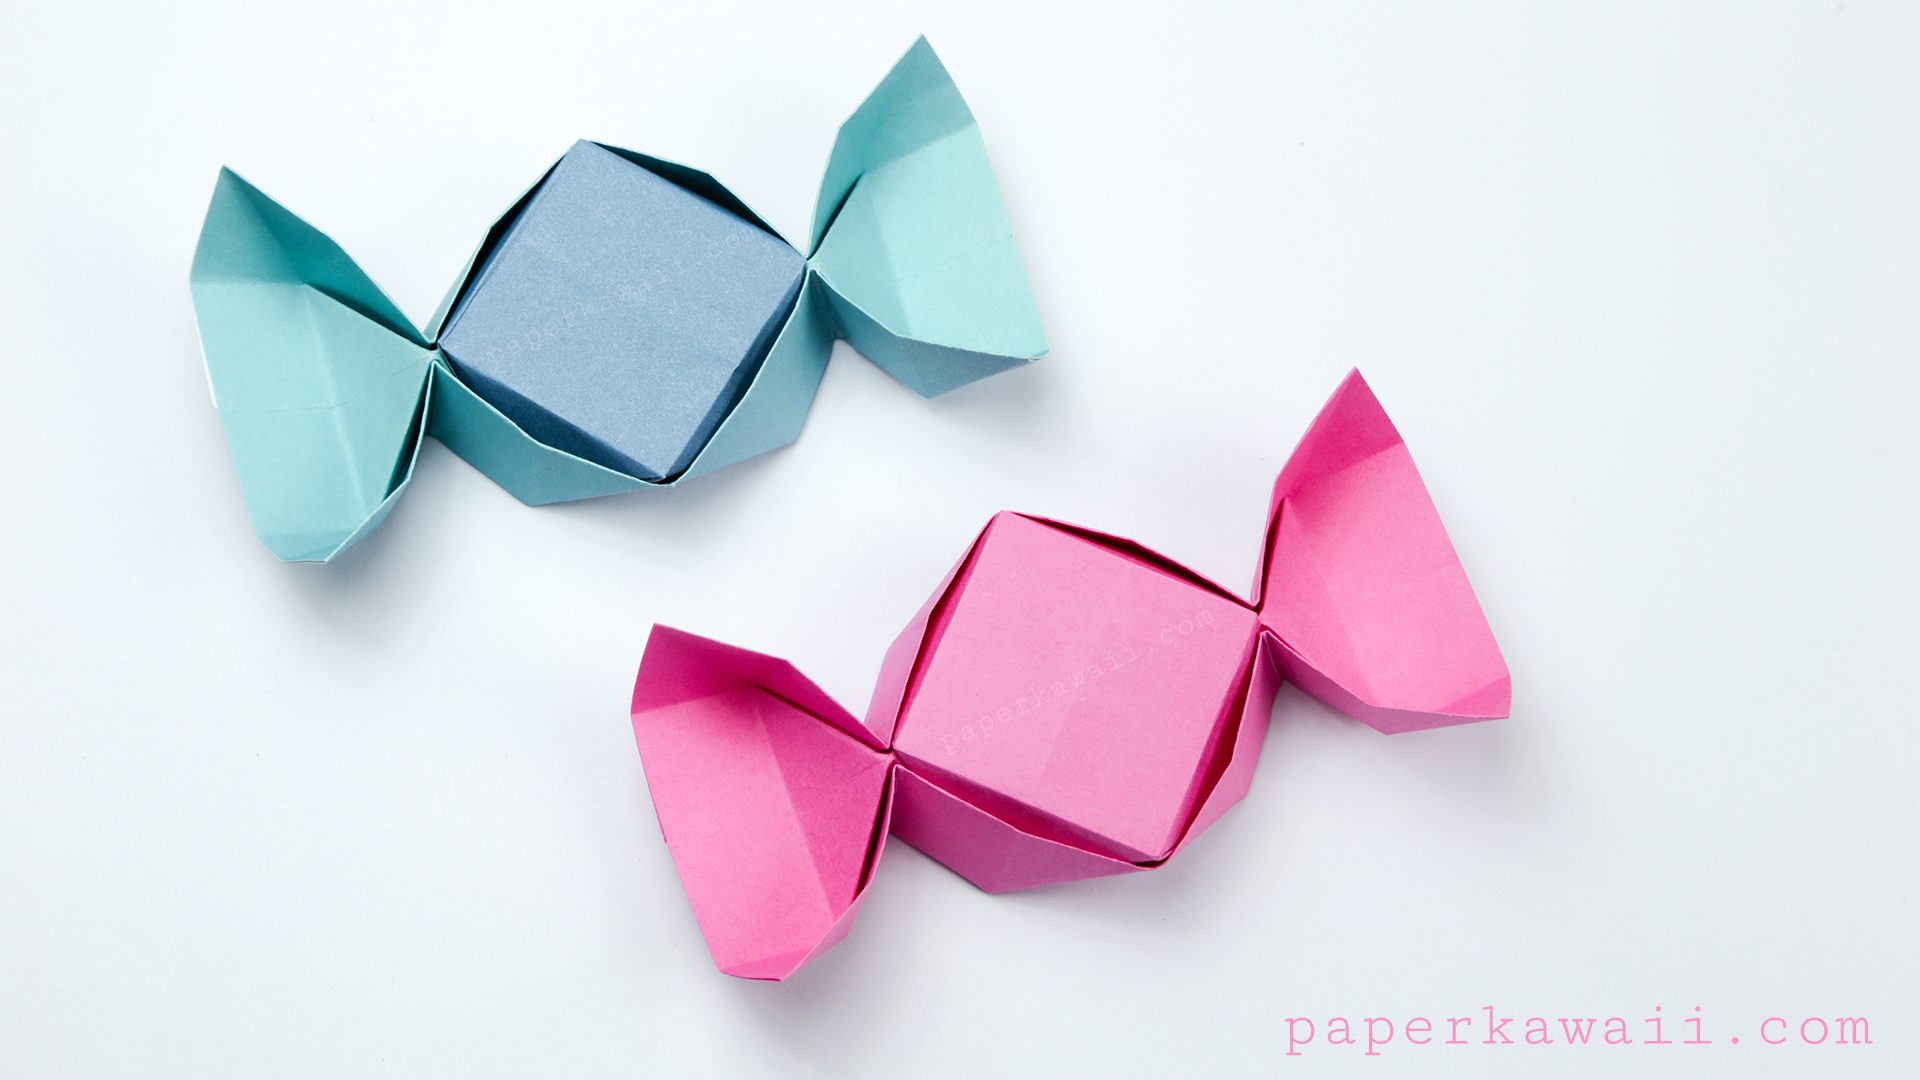 Easy Origami Candy Box Instructions